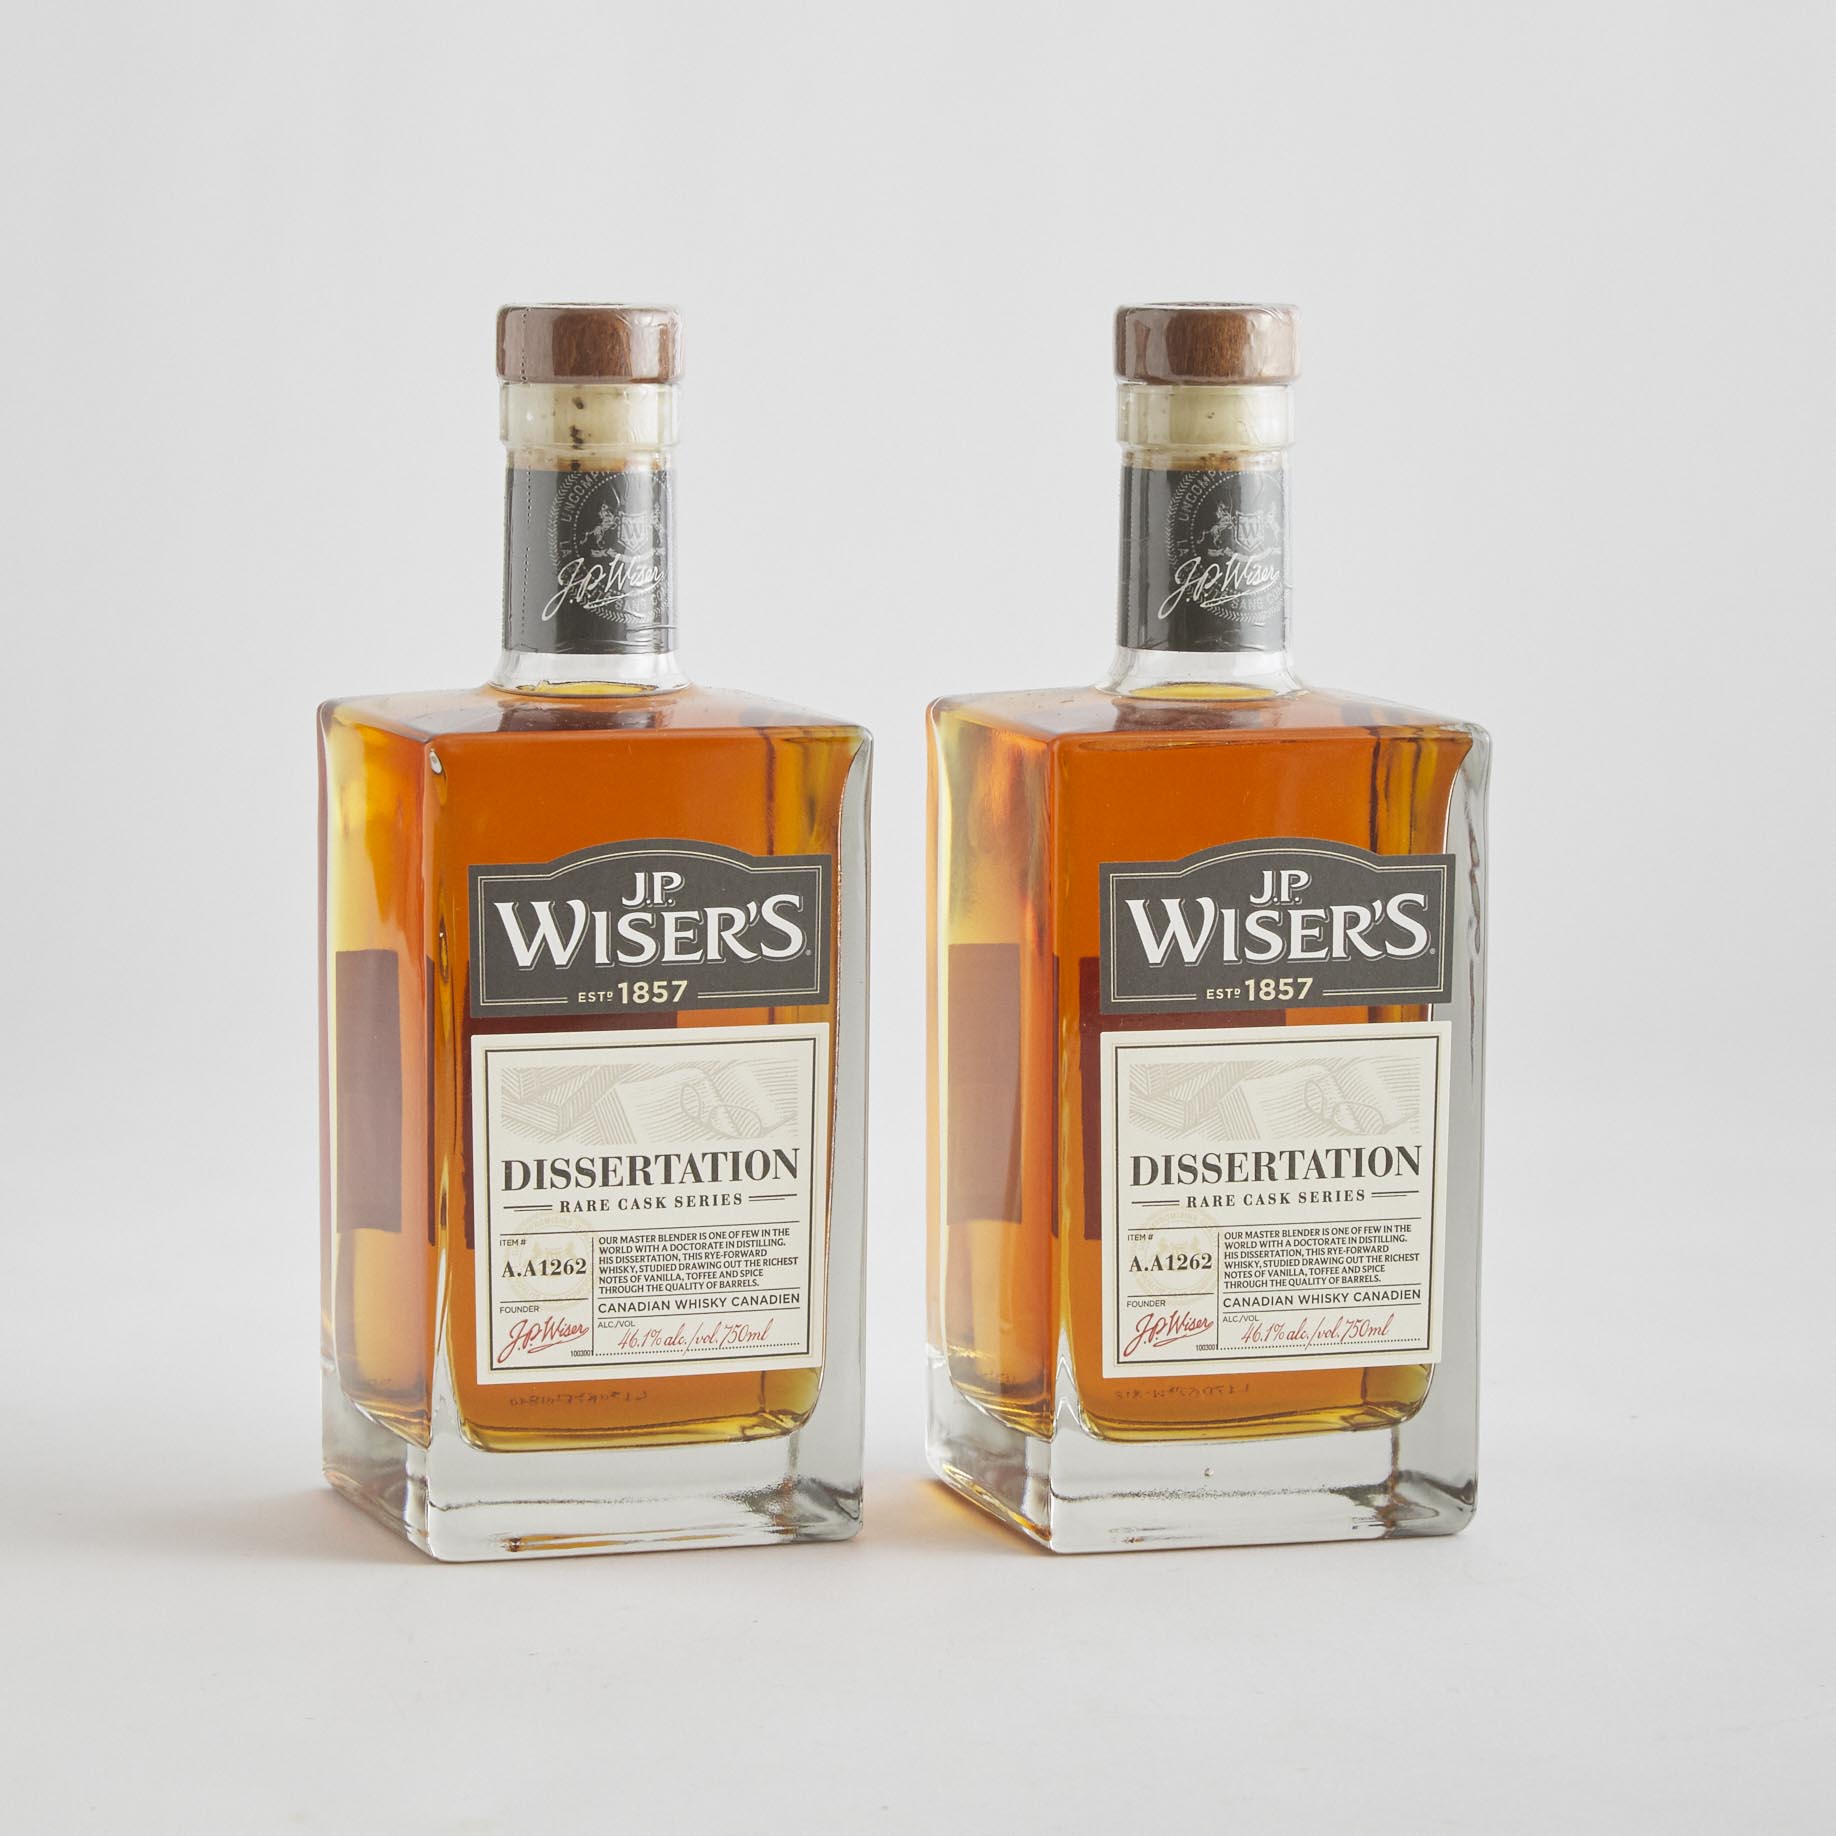 J.P. WISER’S CANADIAN WHISKY (TWO 750 ML)